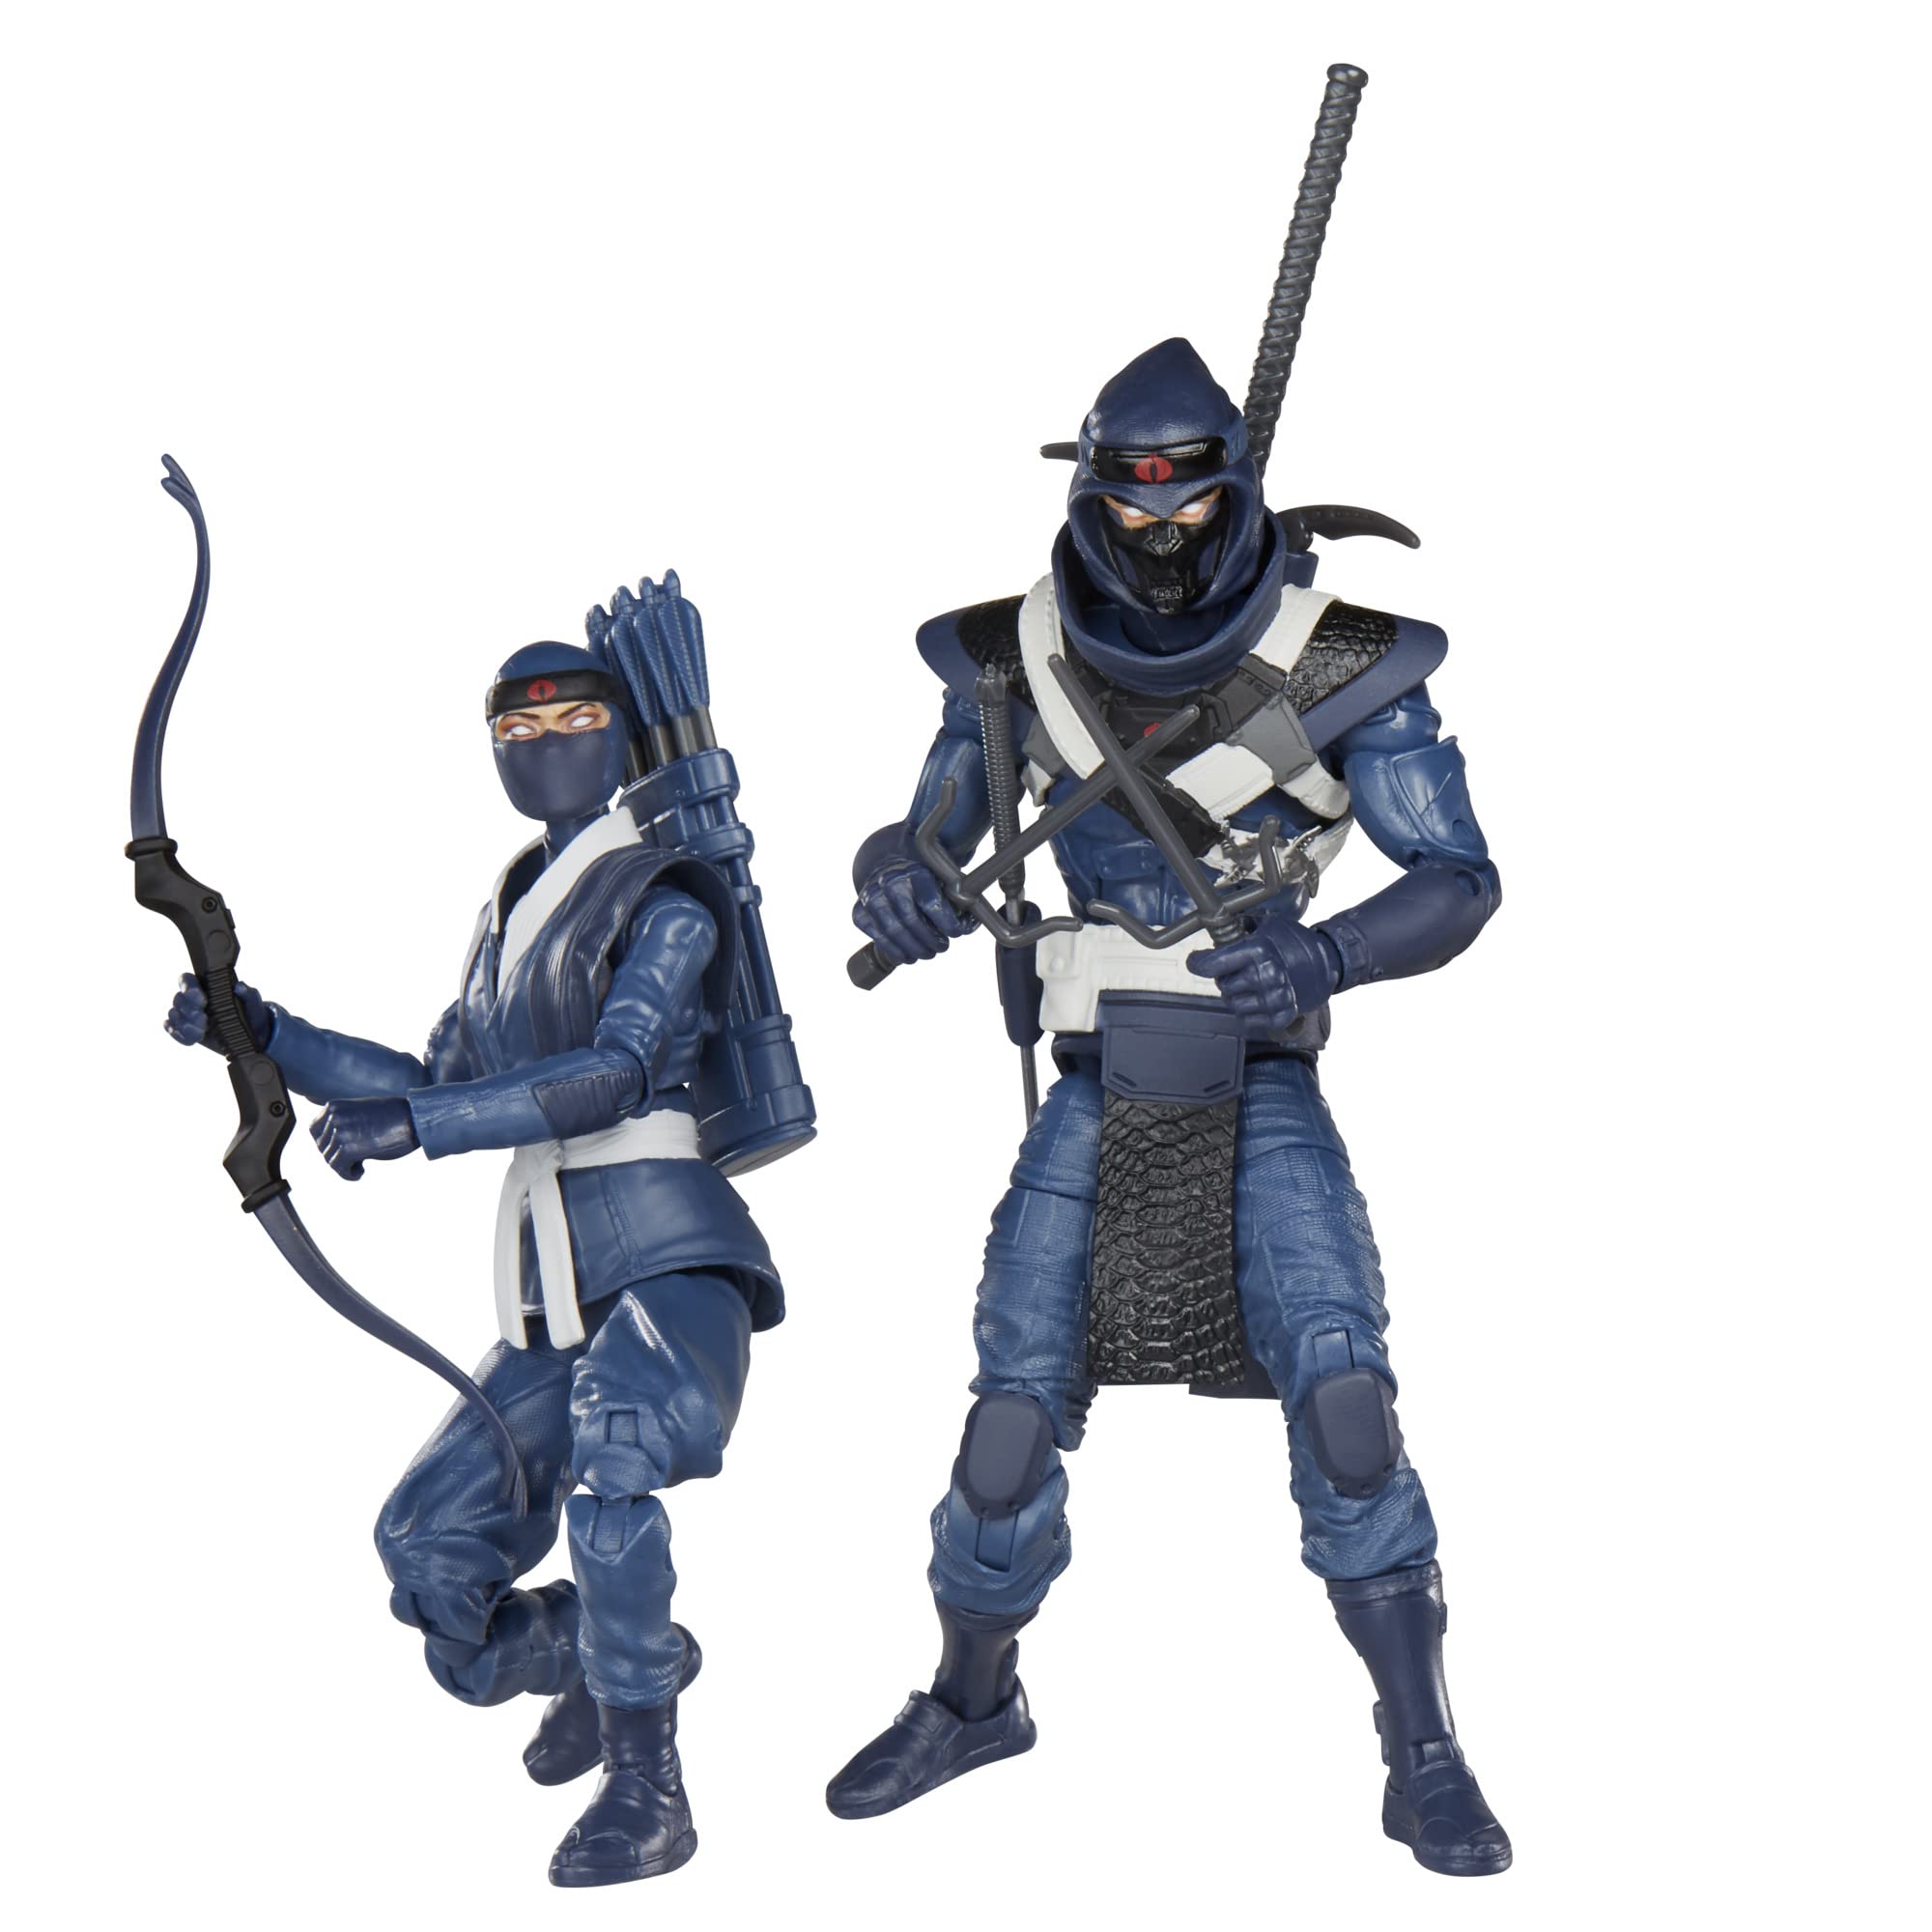 G.I. Joe Classified Series Ninjas Action Figure with Accessories, Blue, 6 inch (Pack of 2) (Amazon Exclusive)